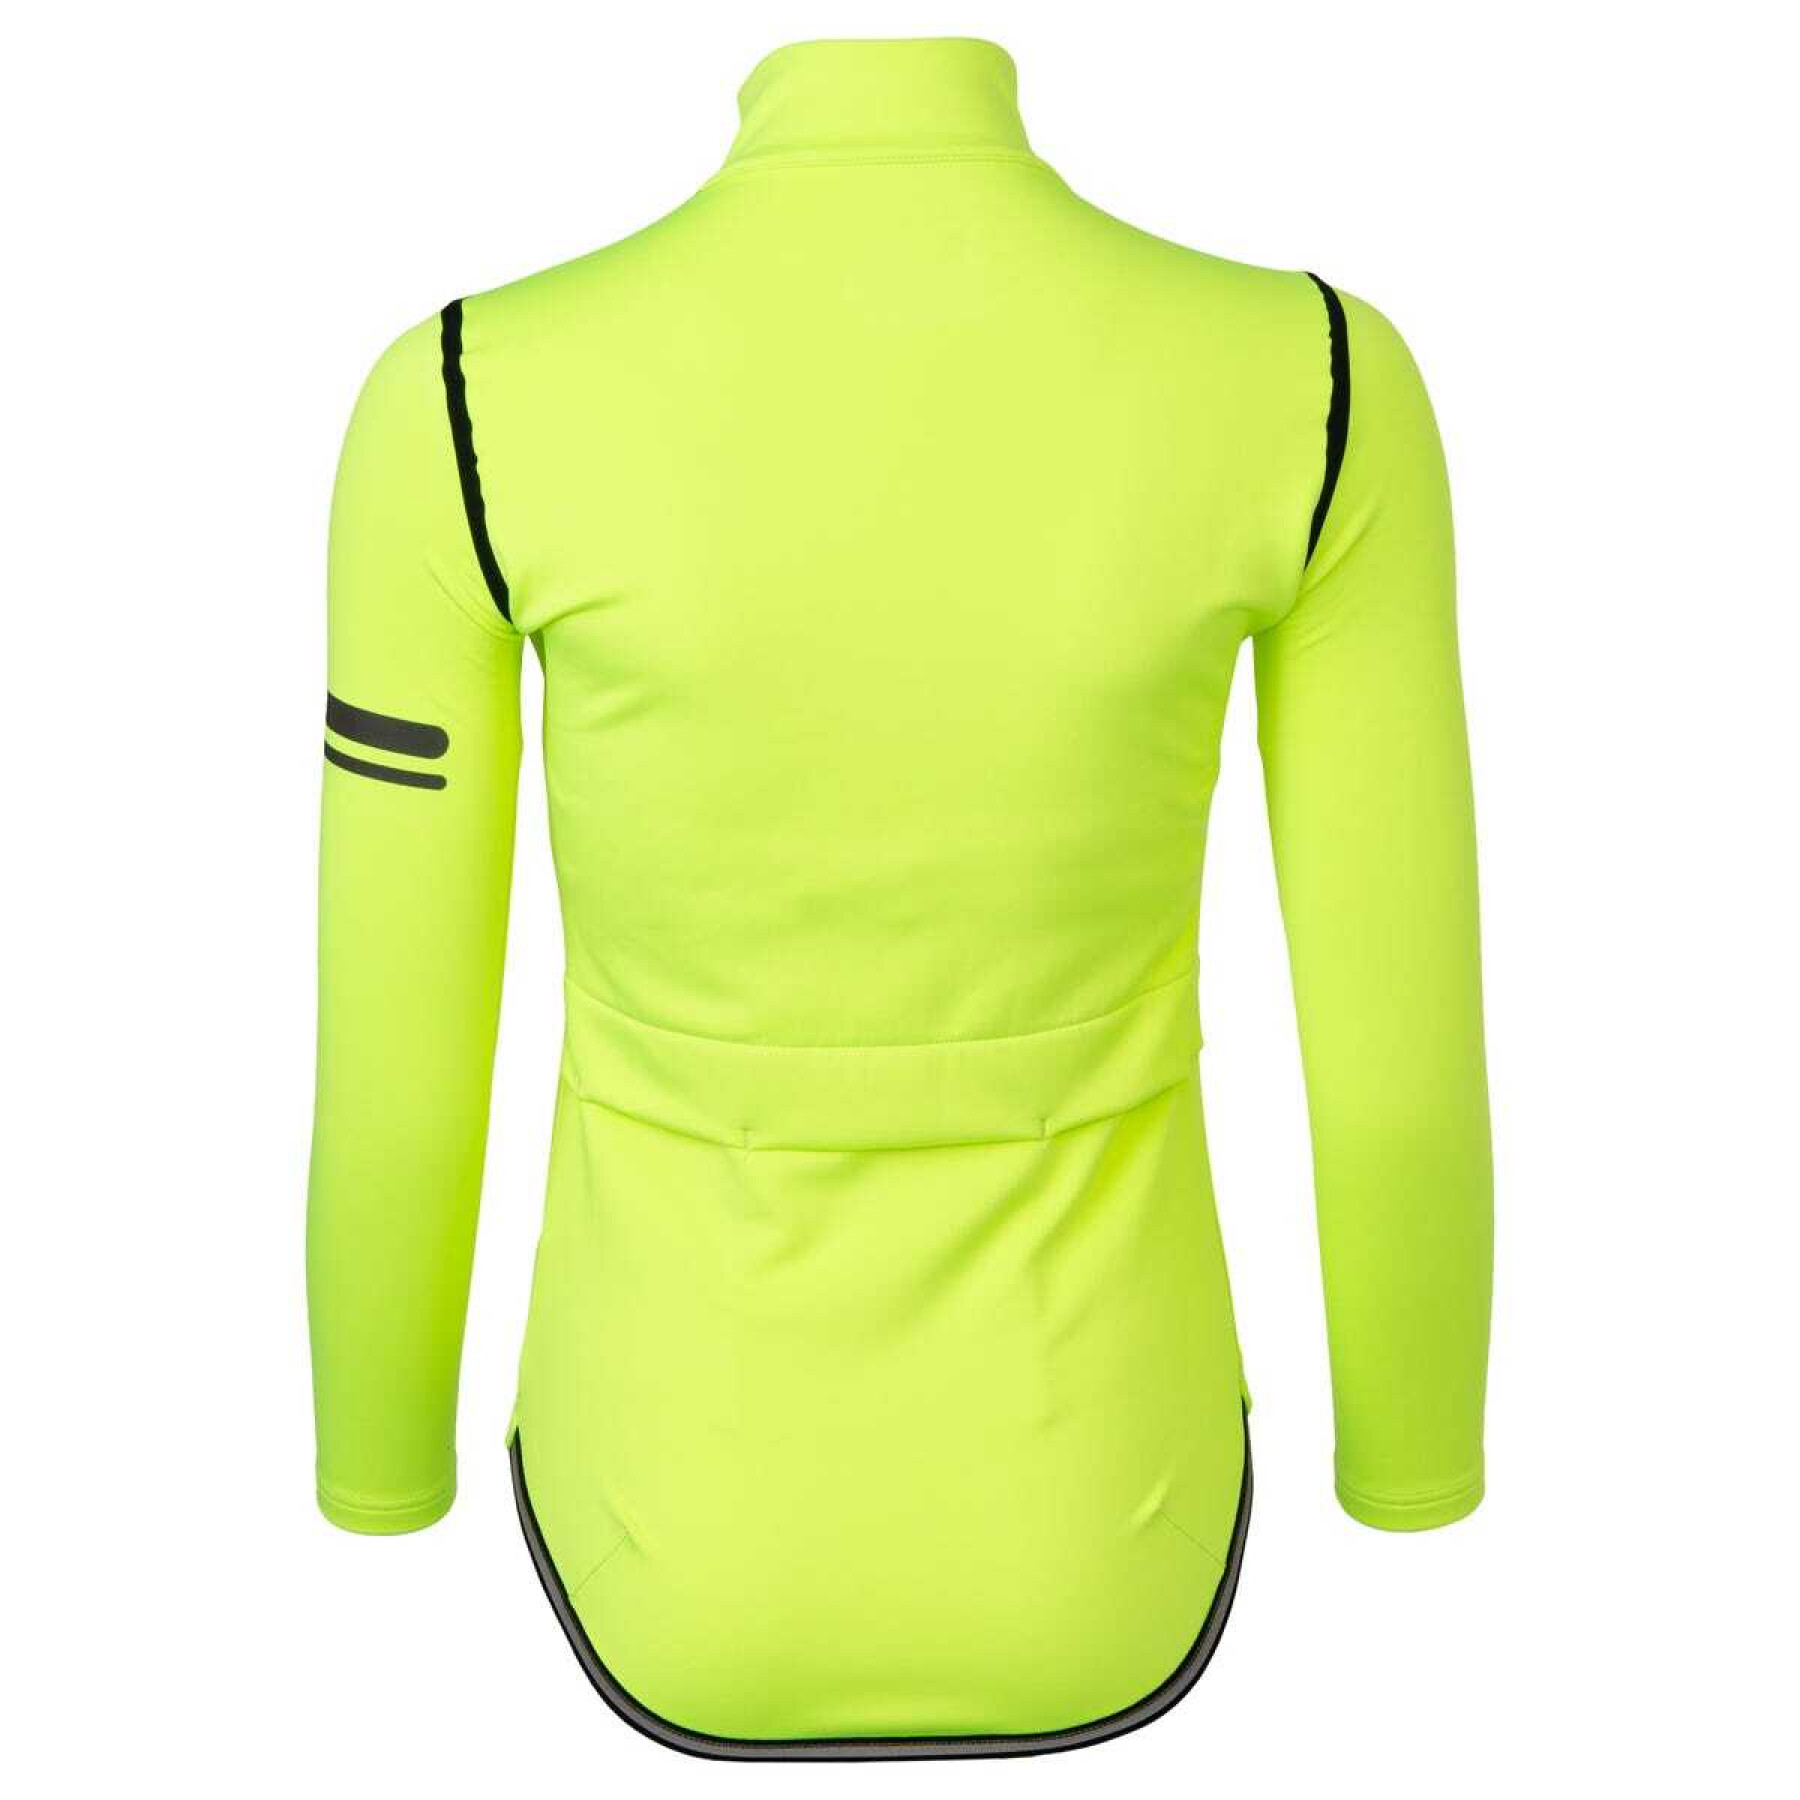 Maillot manches longues femme Agu Performance